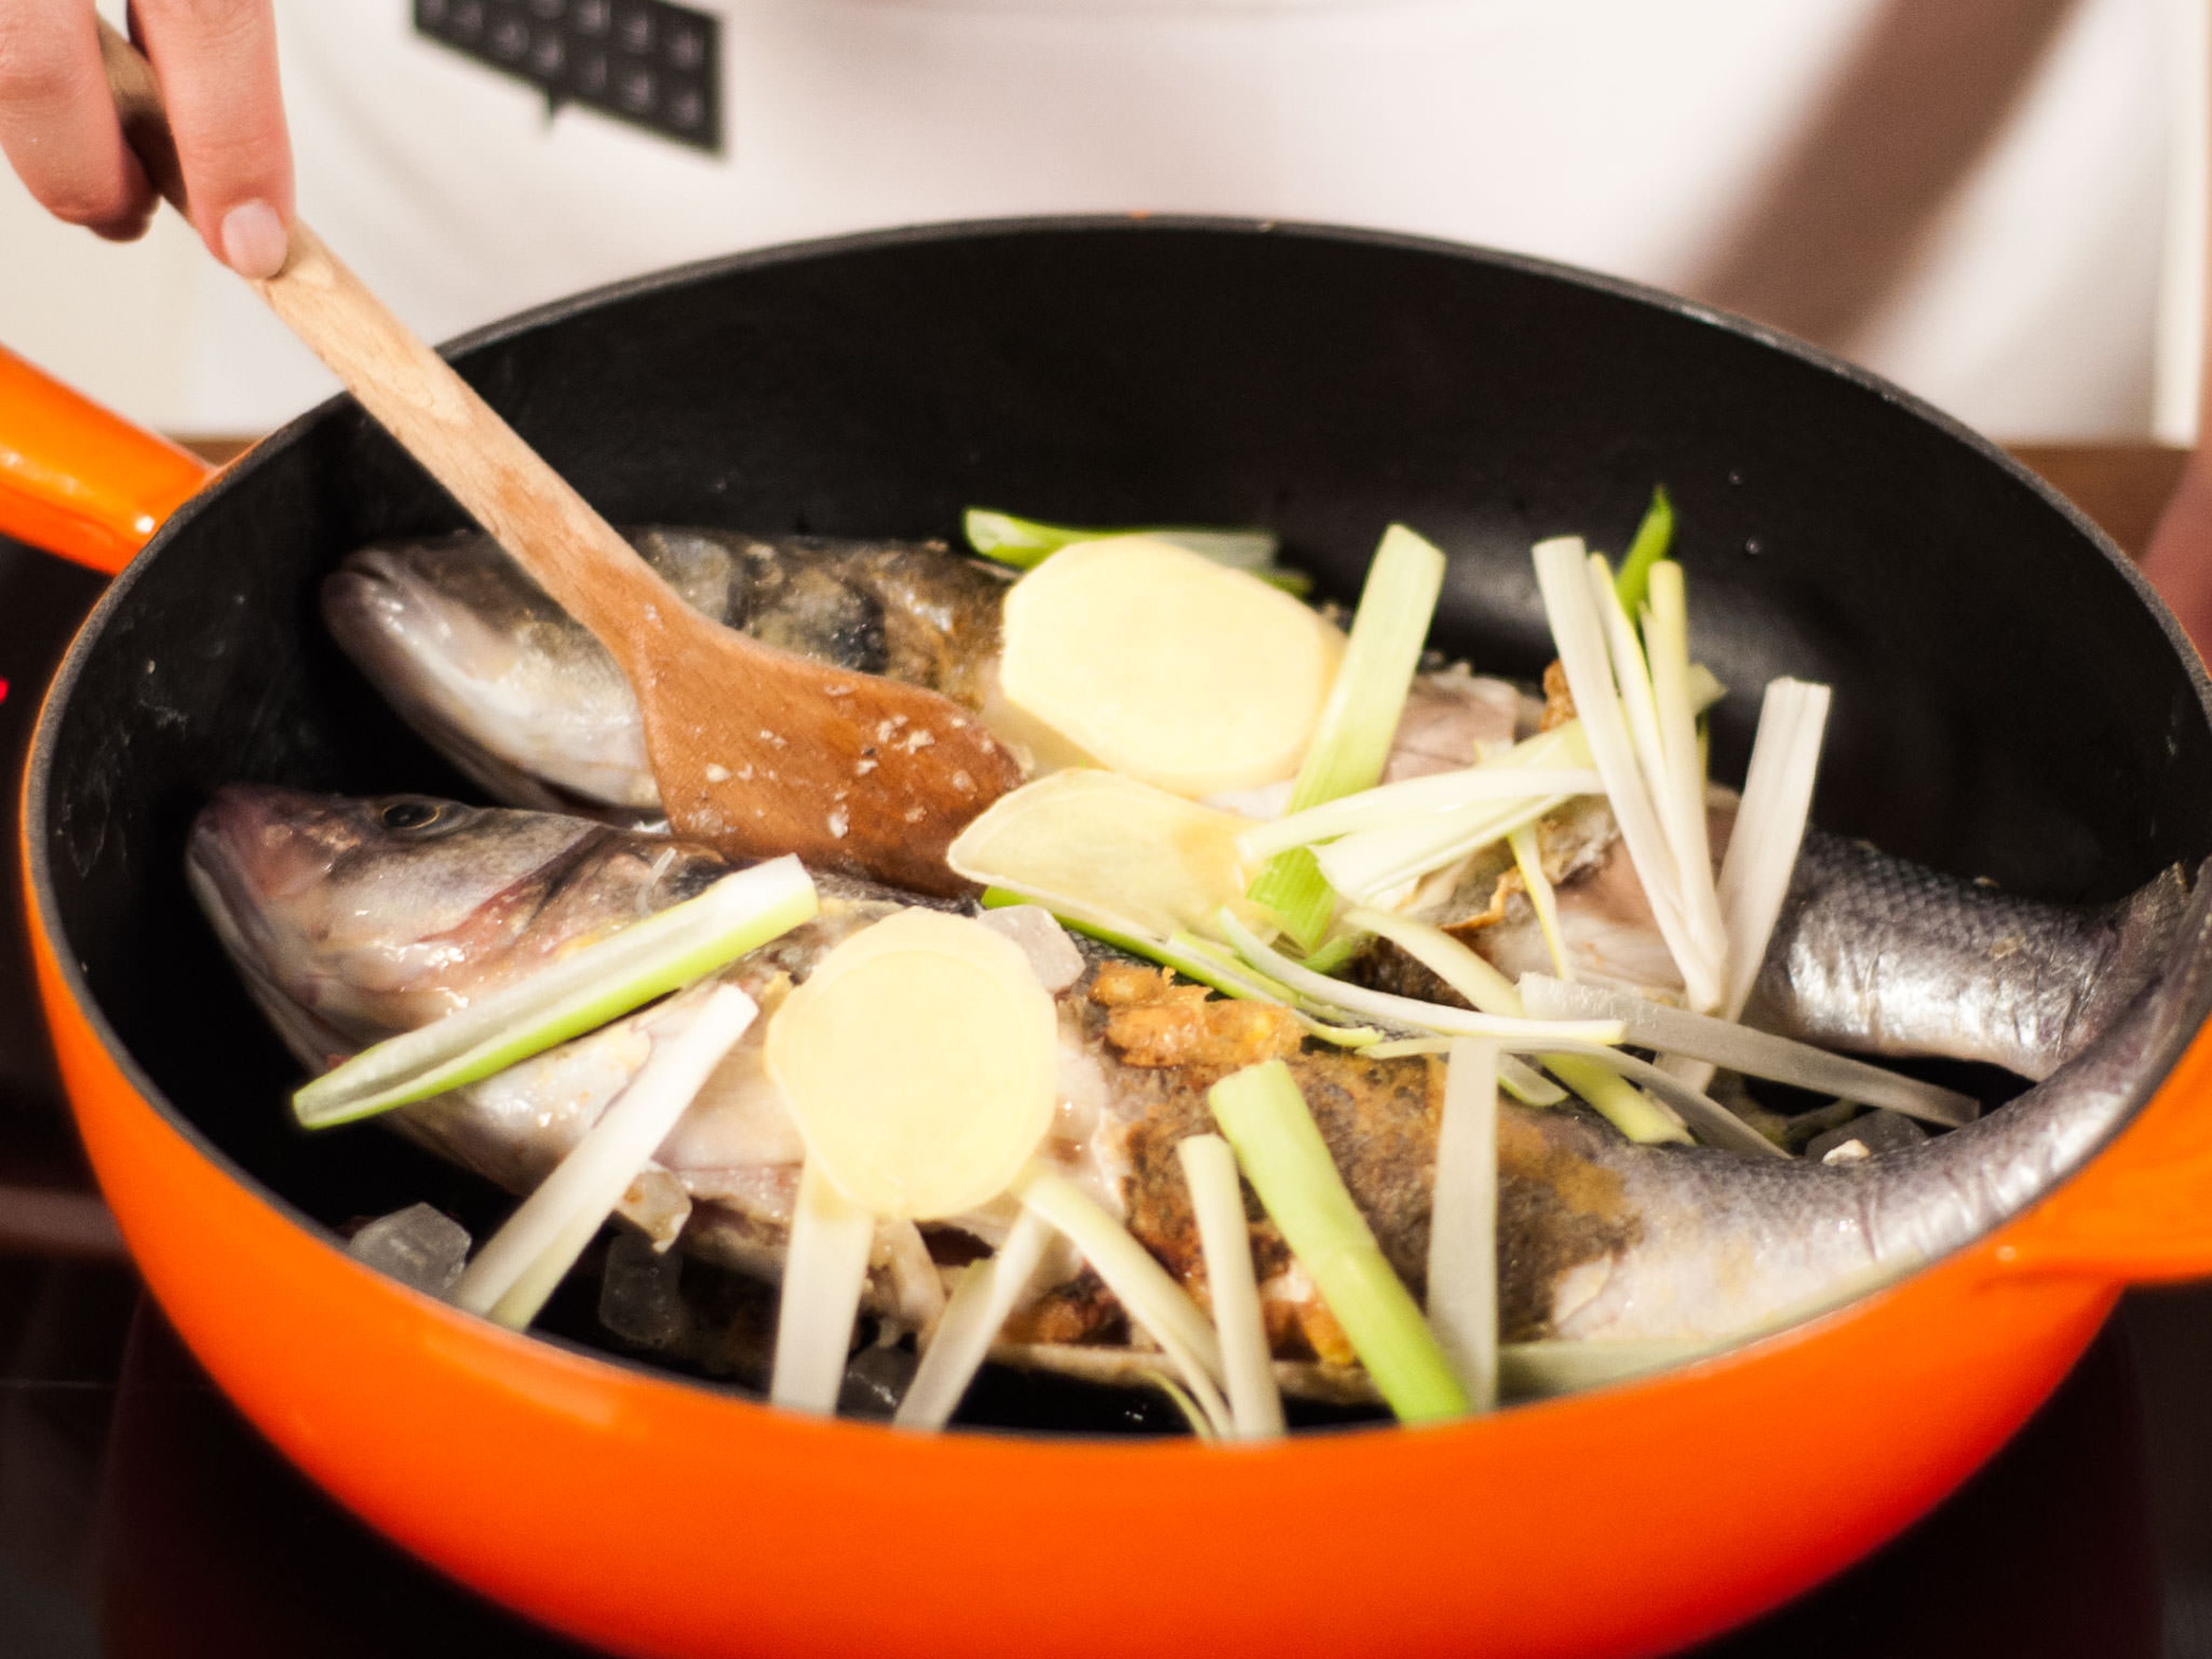 Add sliced ginger, spring onion, garlic, star anise, and rock sugar to the pan and continue to fry for approx. 1 – 2 min.